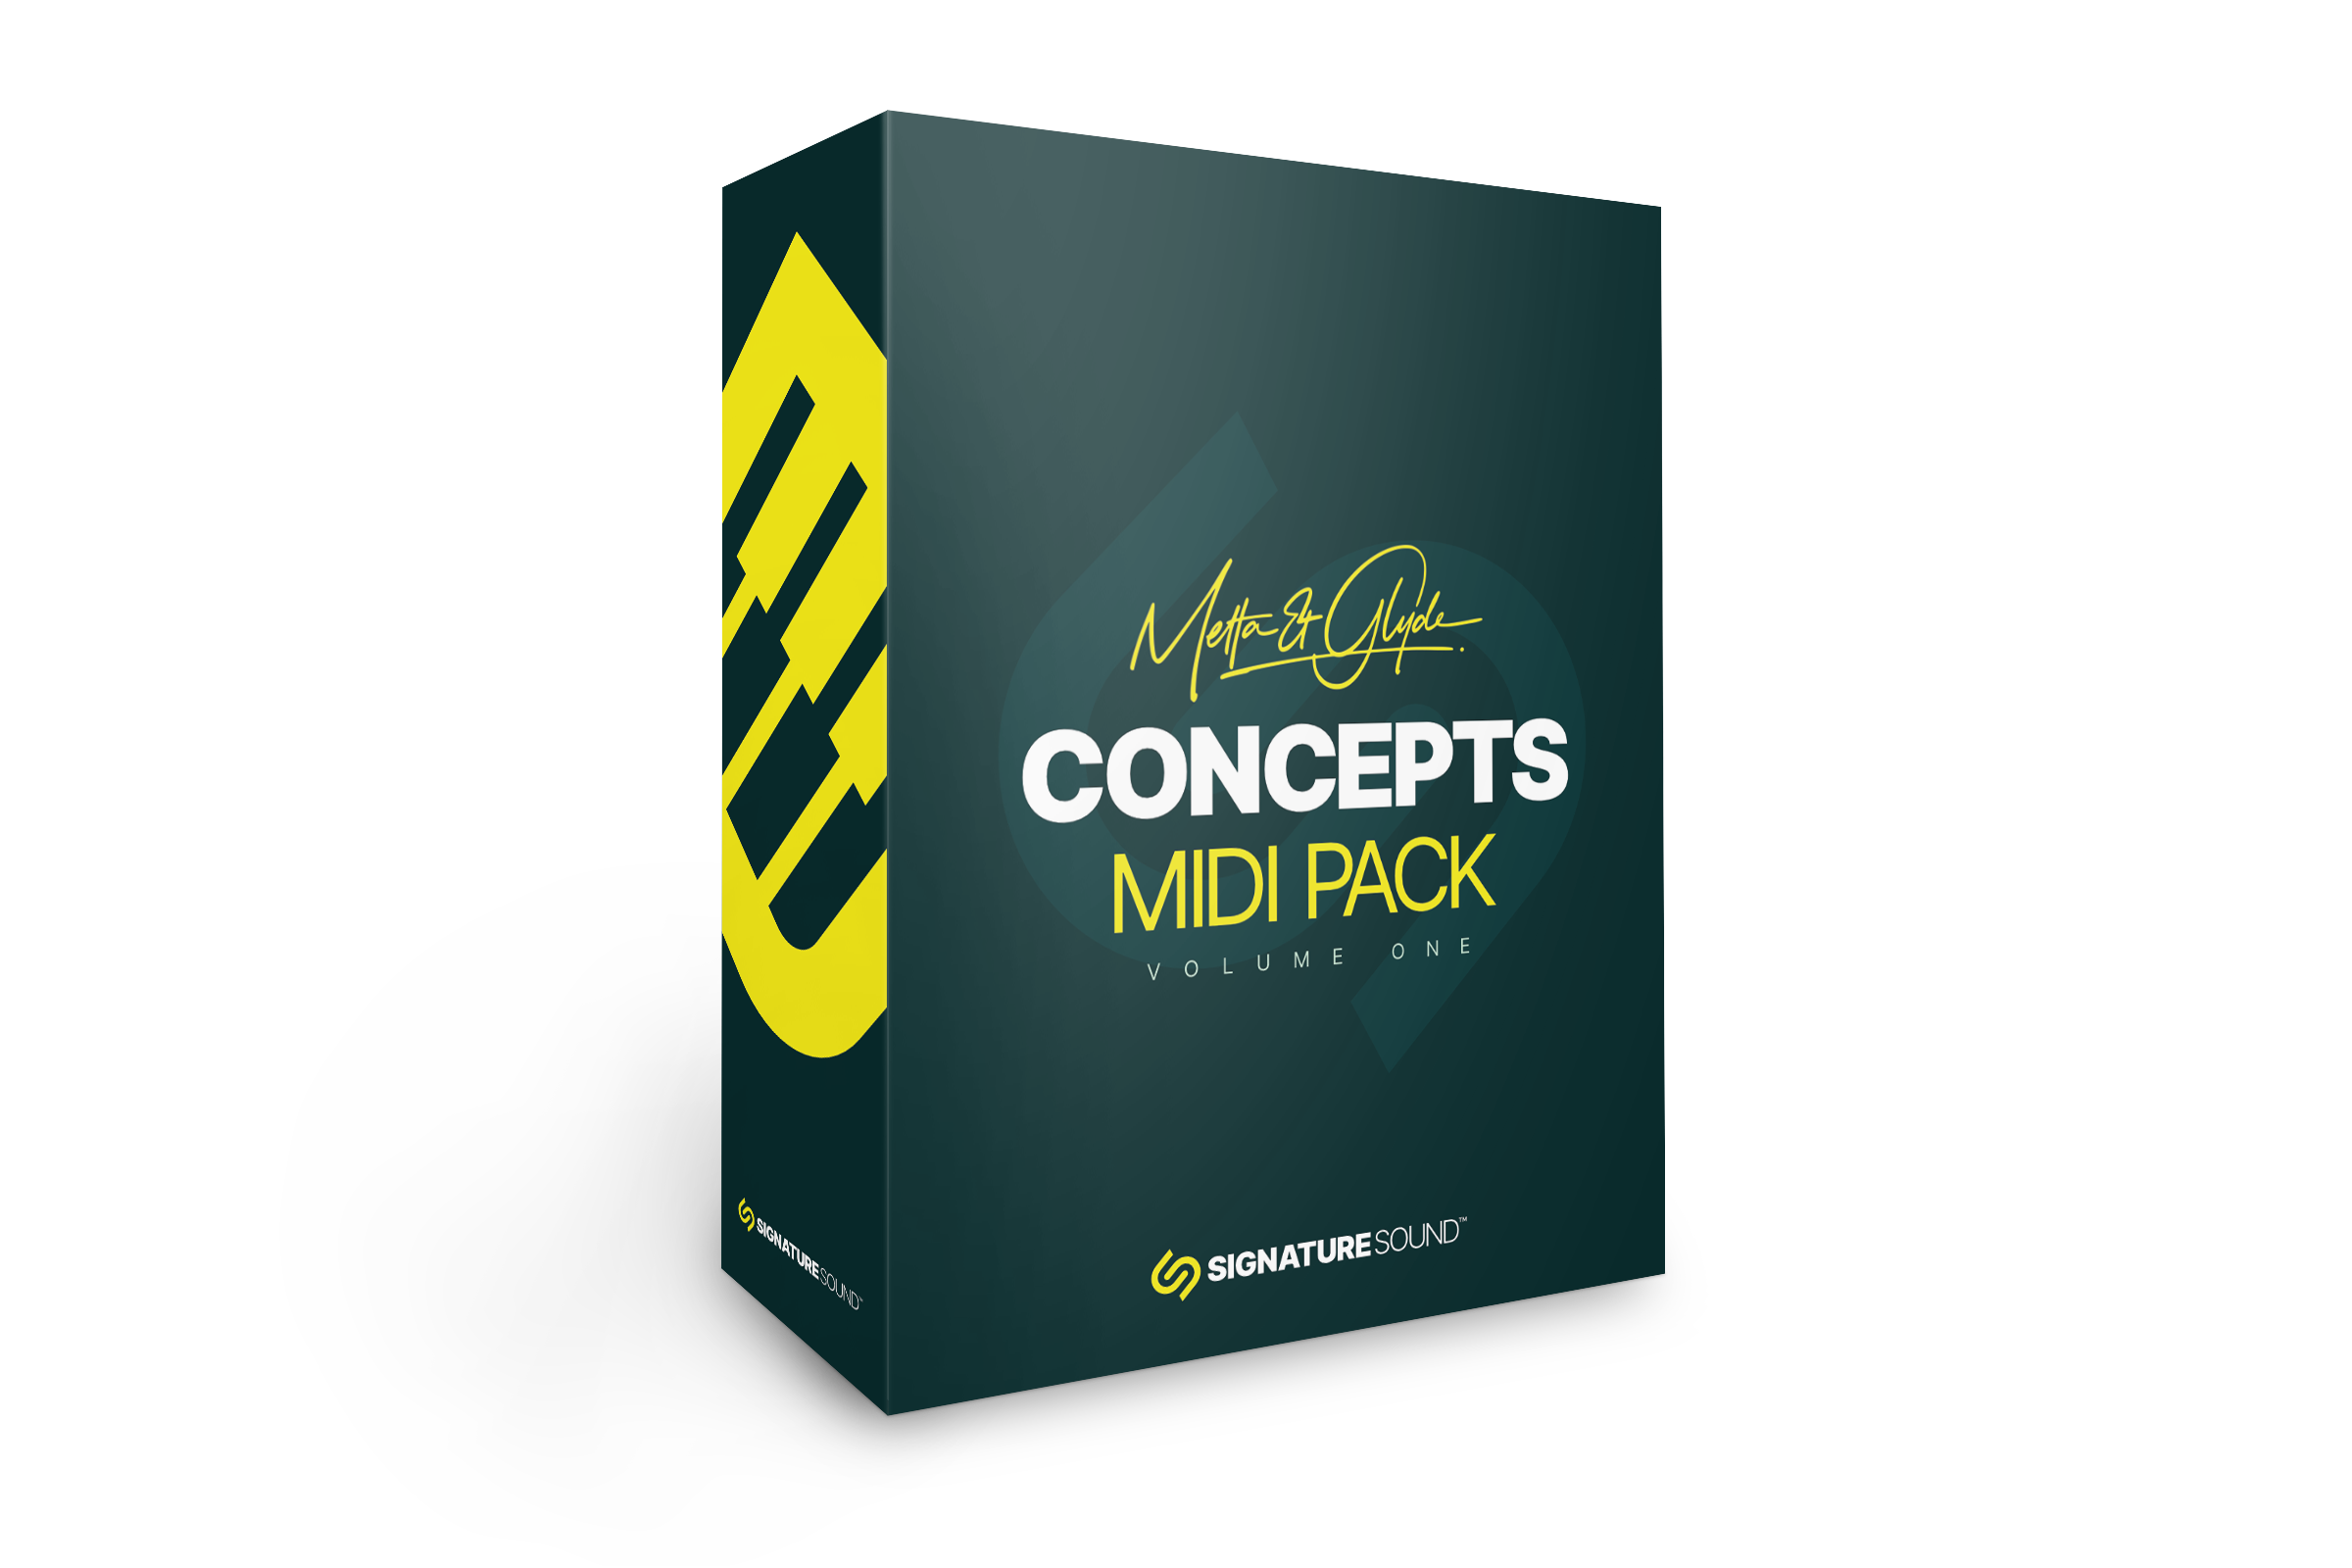 Metta & Glyde Concepts [Midi Pack] Volume One